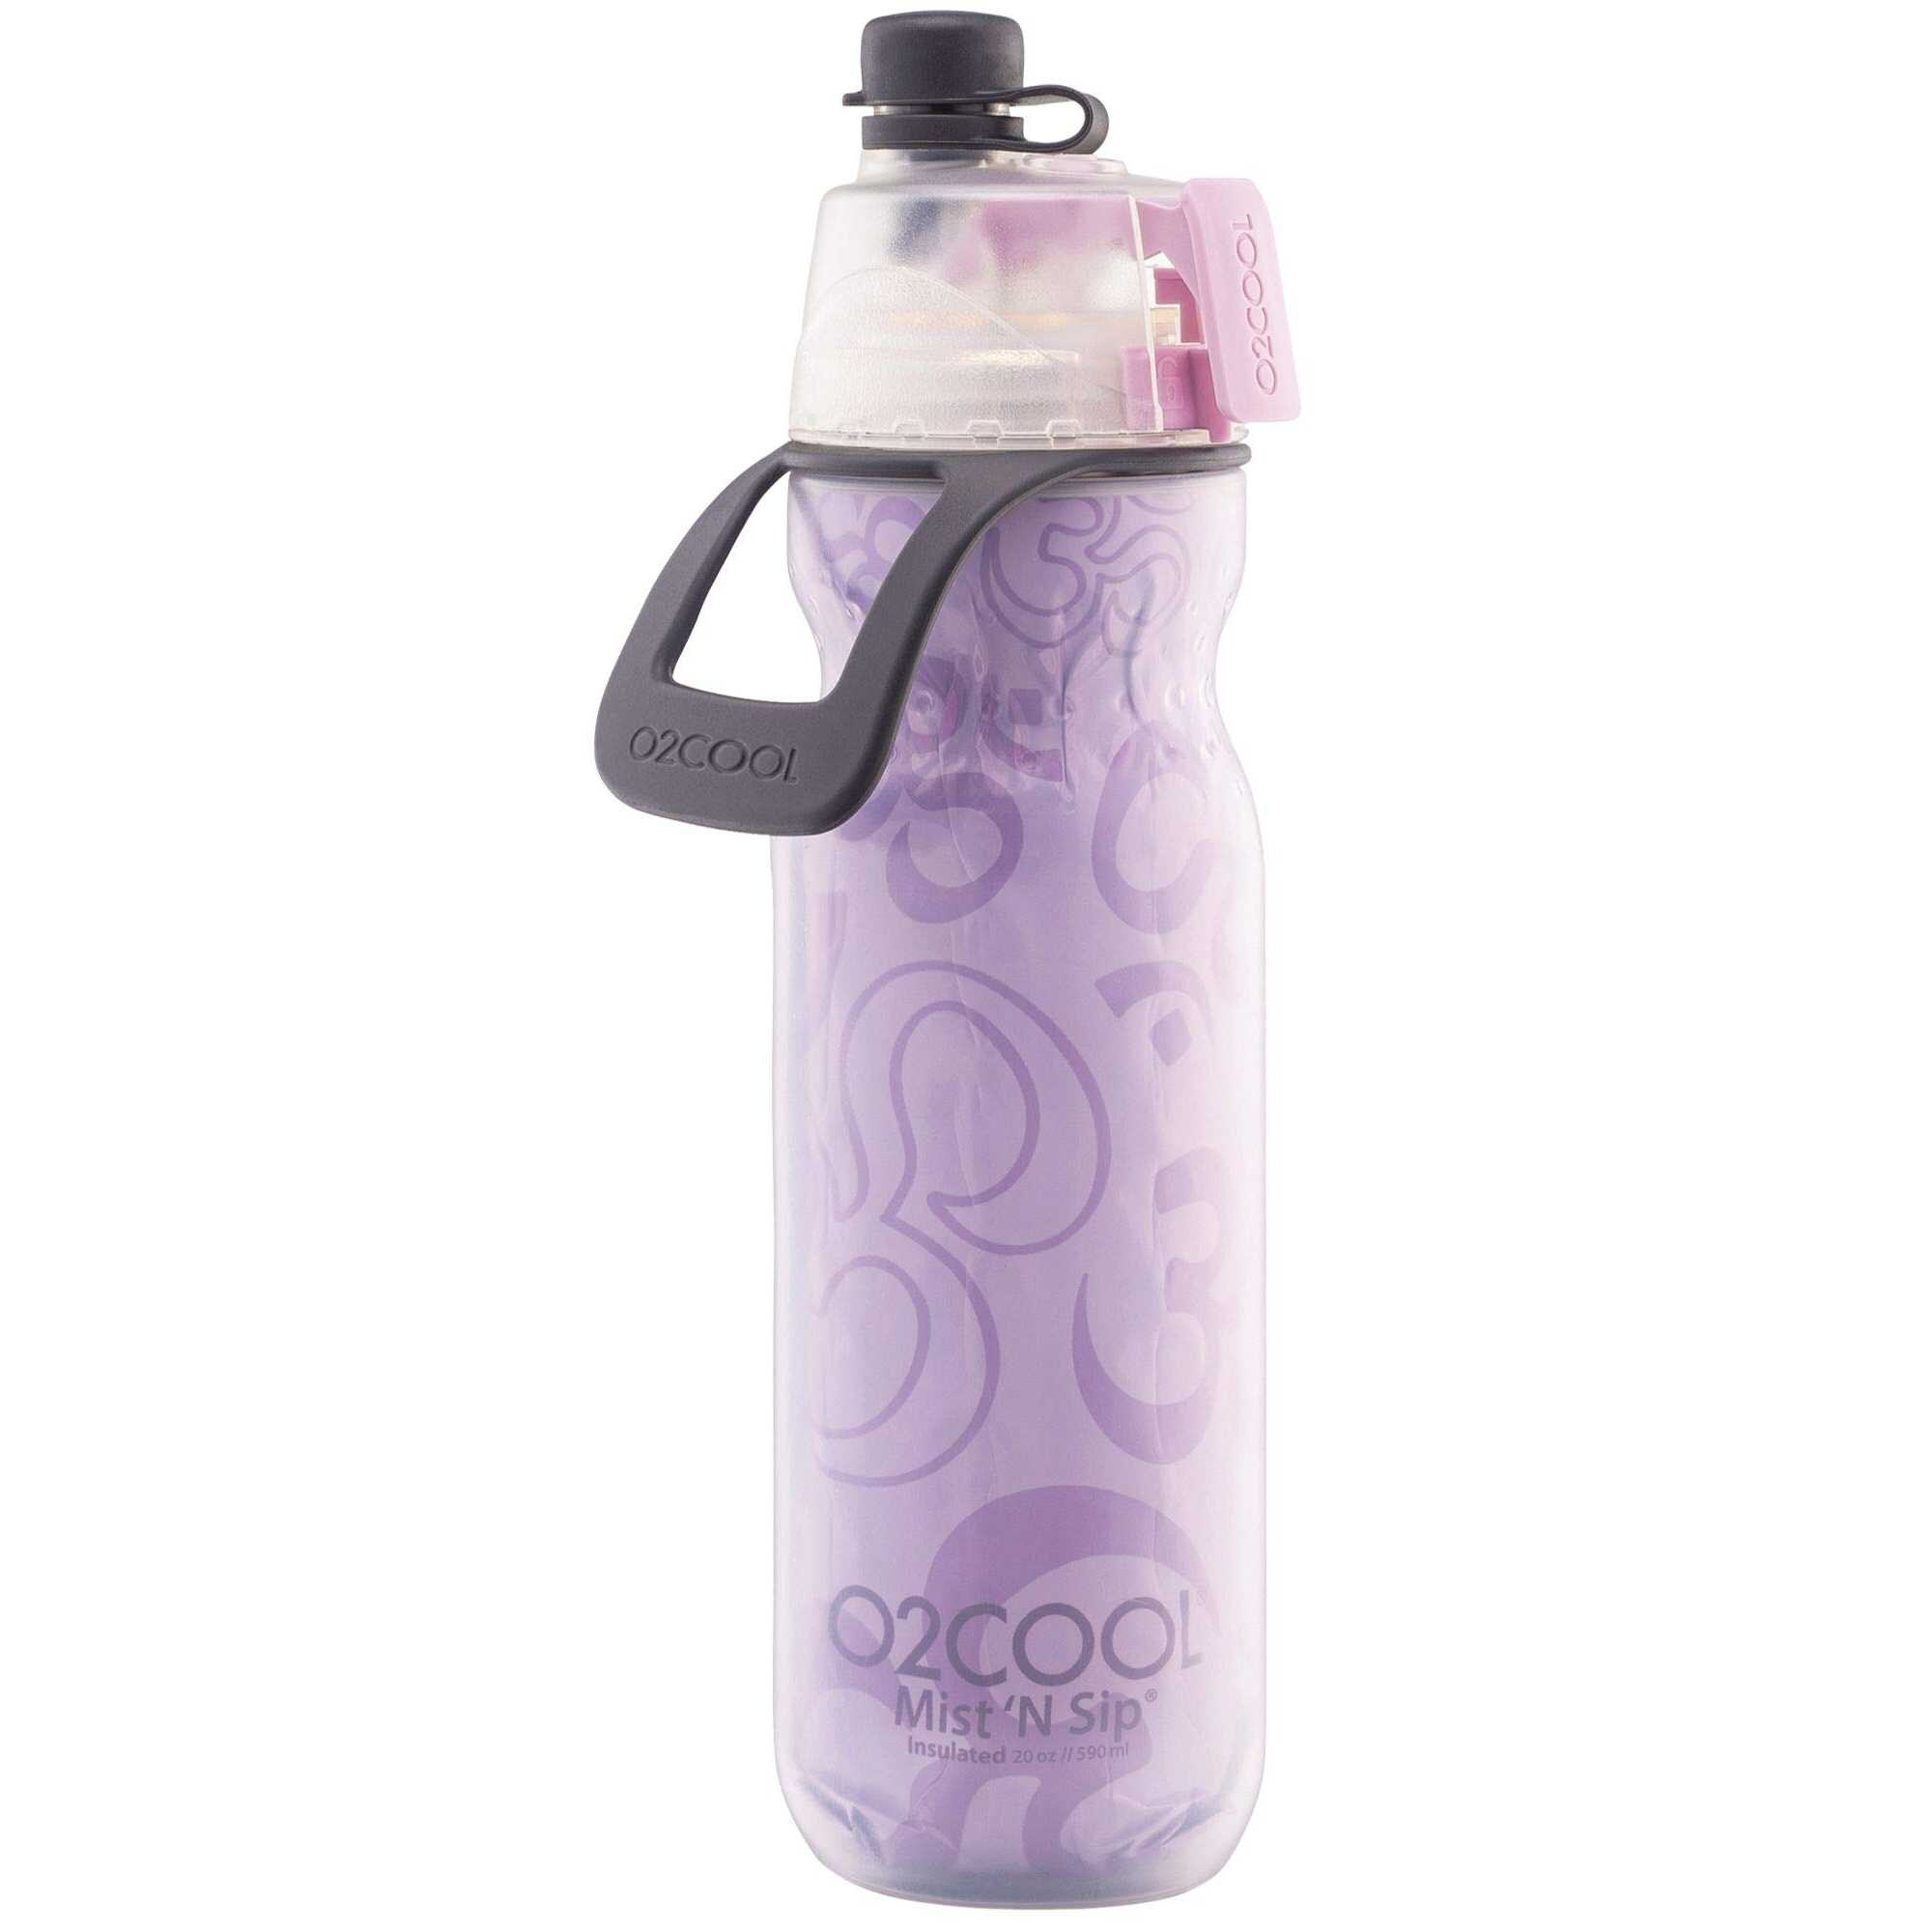 O2Cool Mist 'N Sip Yoga Series Insulated Water Bottle, 567Ml, Yoga Lilac